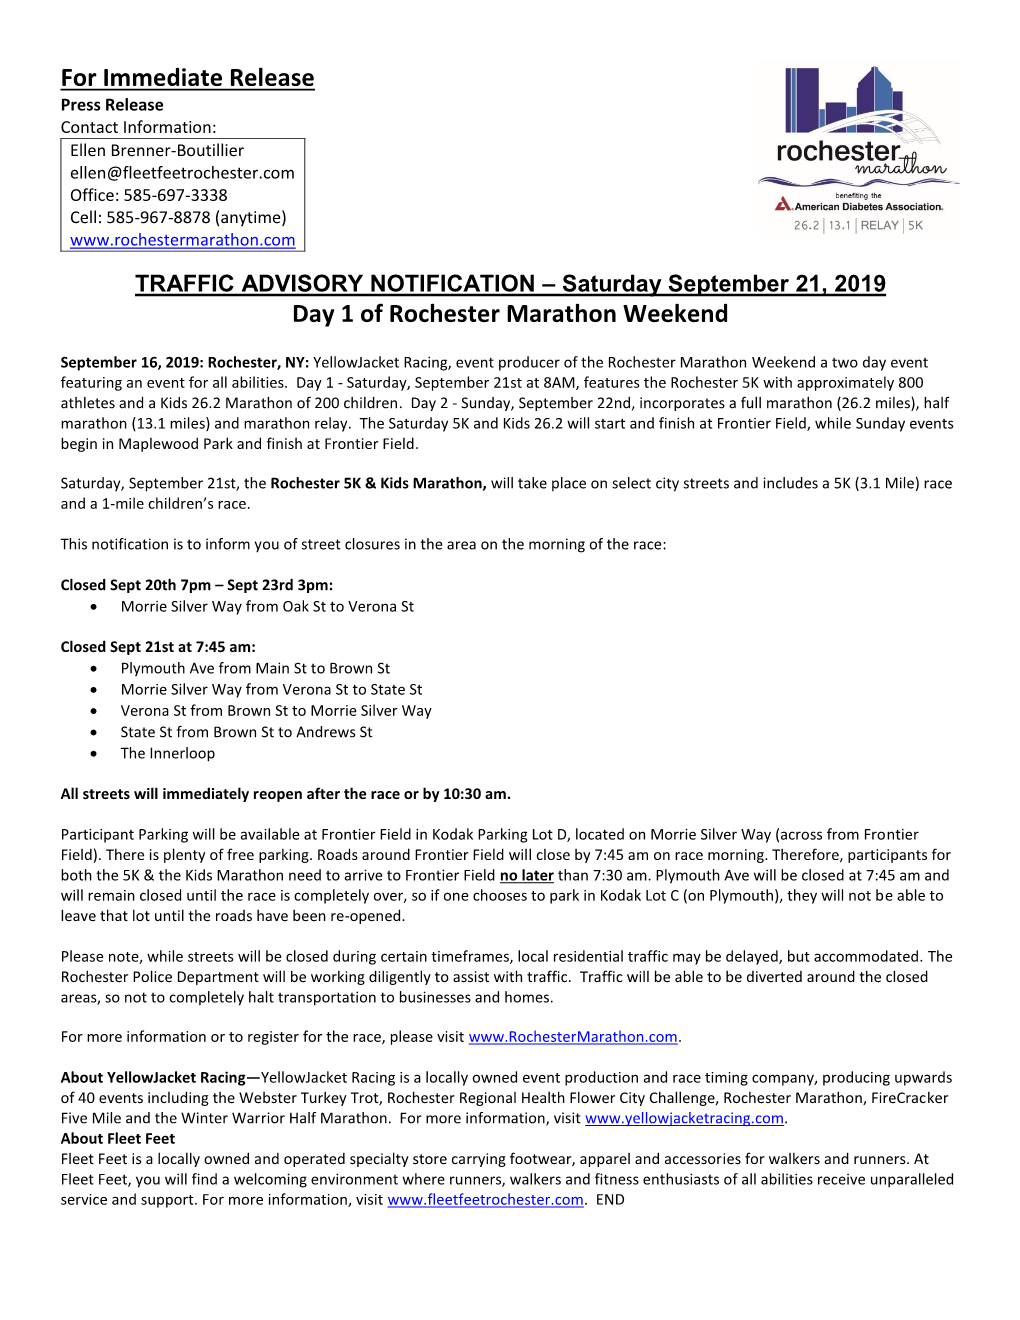 For Immediate Release Day 1 of Rochester Marathon Weekend